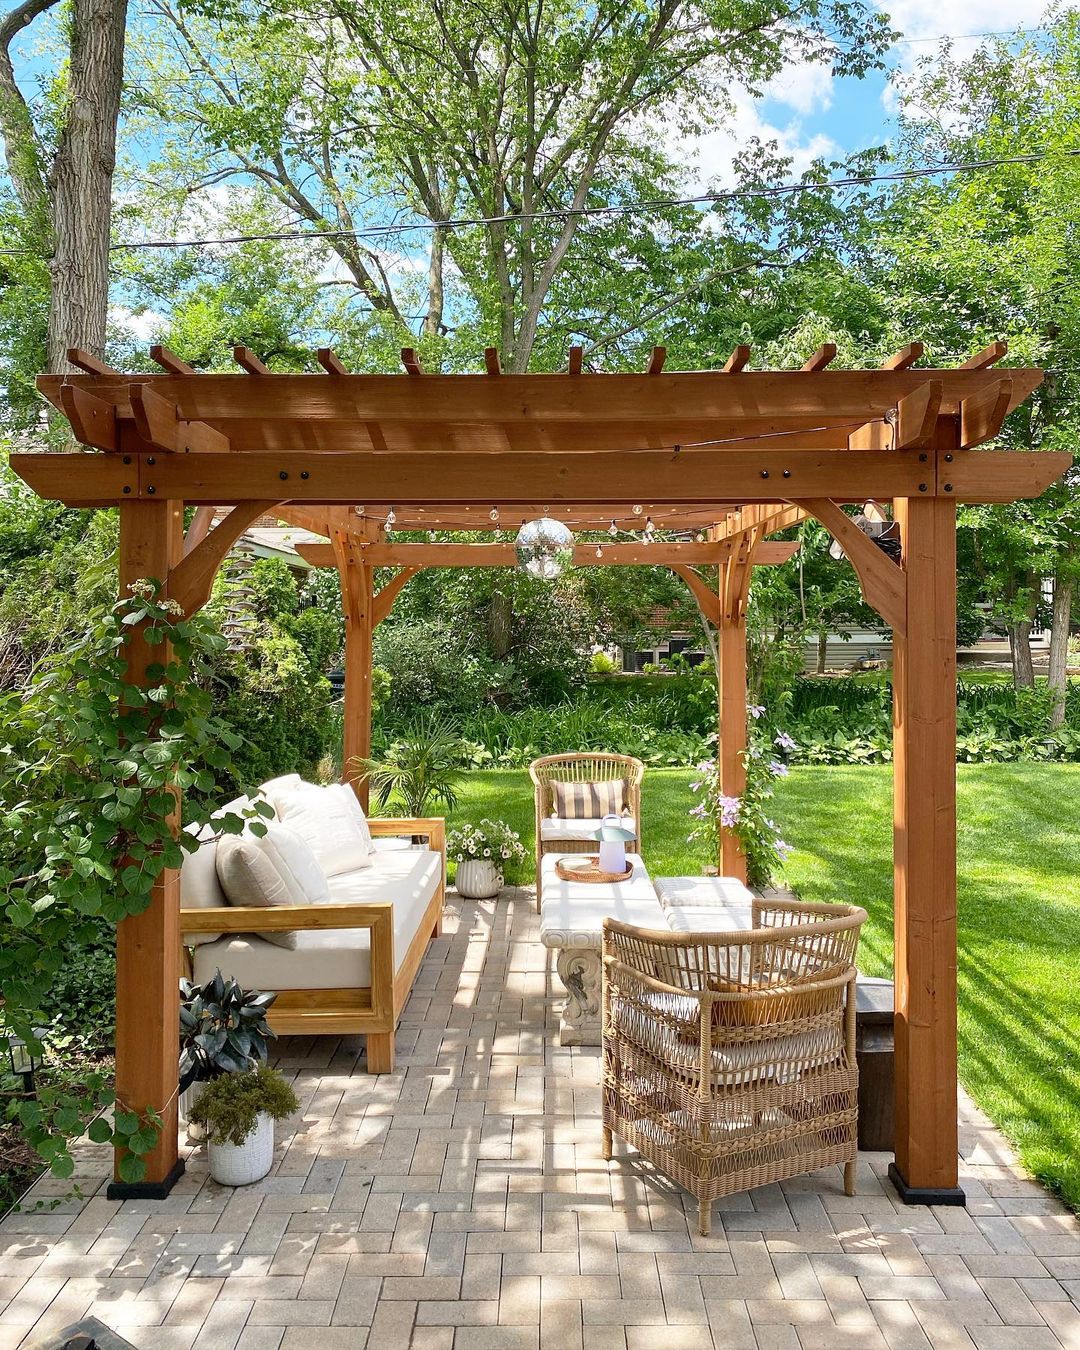 A gazebo in the backyard with white patio furniture. Photo by Instagram user @heyjerry_home